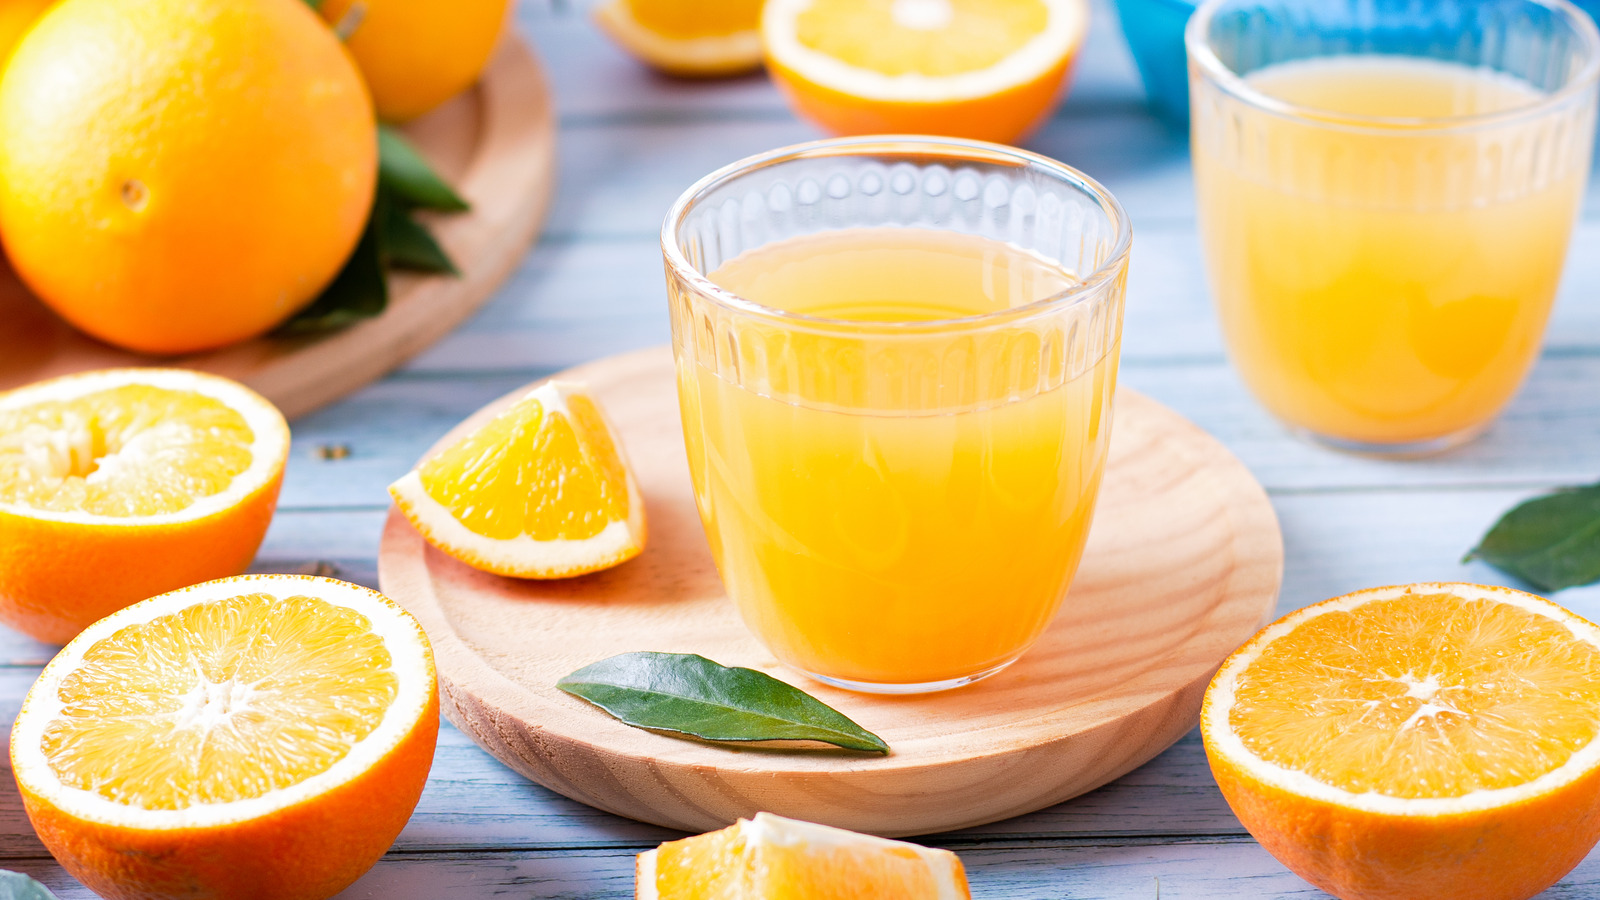 The Real Reason You Should Drink Orange Juice With Pulp